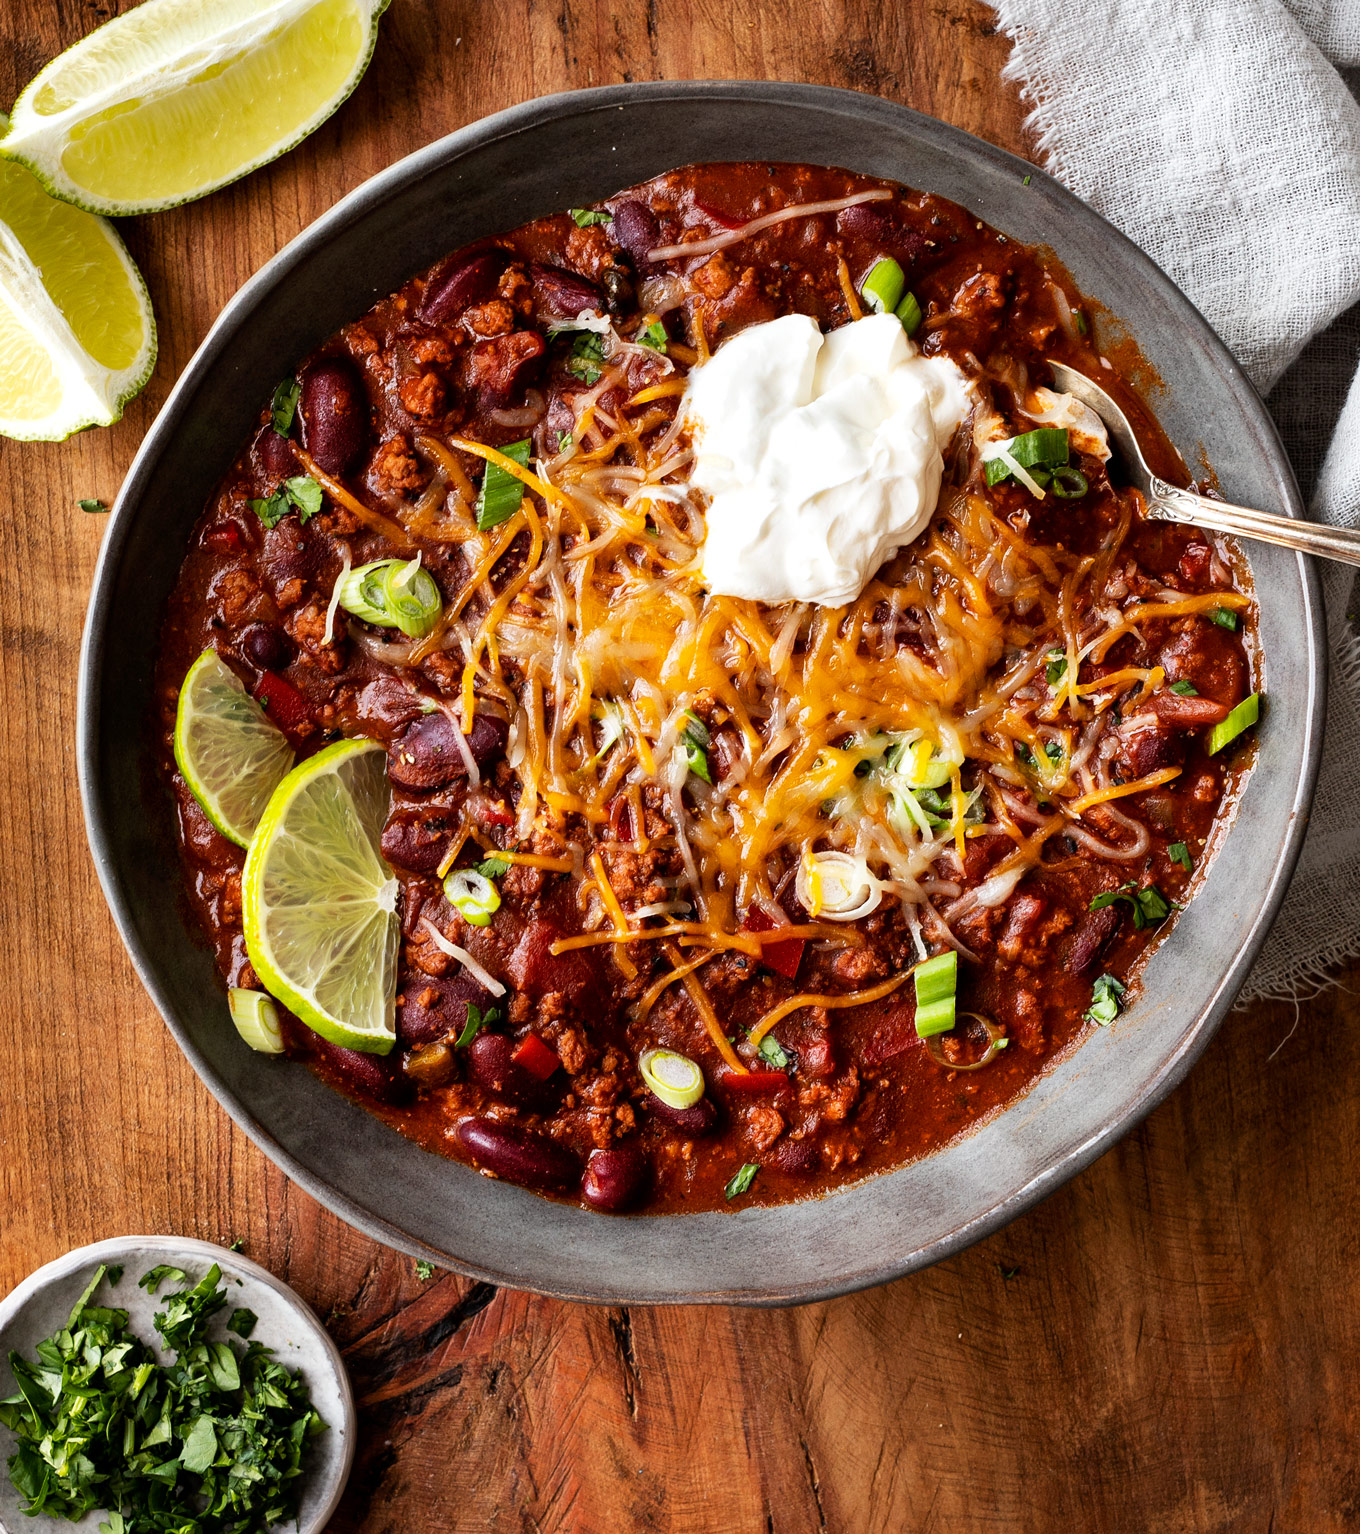 https://www.thechunkychef.com/wp-content/uploads/2015/02/Instant-Pot-Chili-bowloverhead.jpg